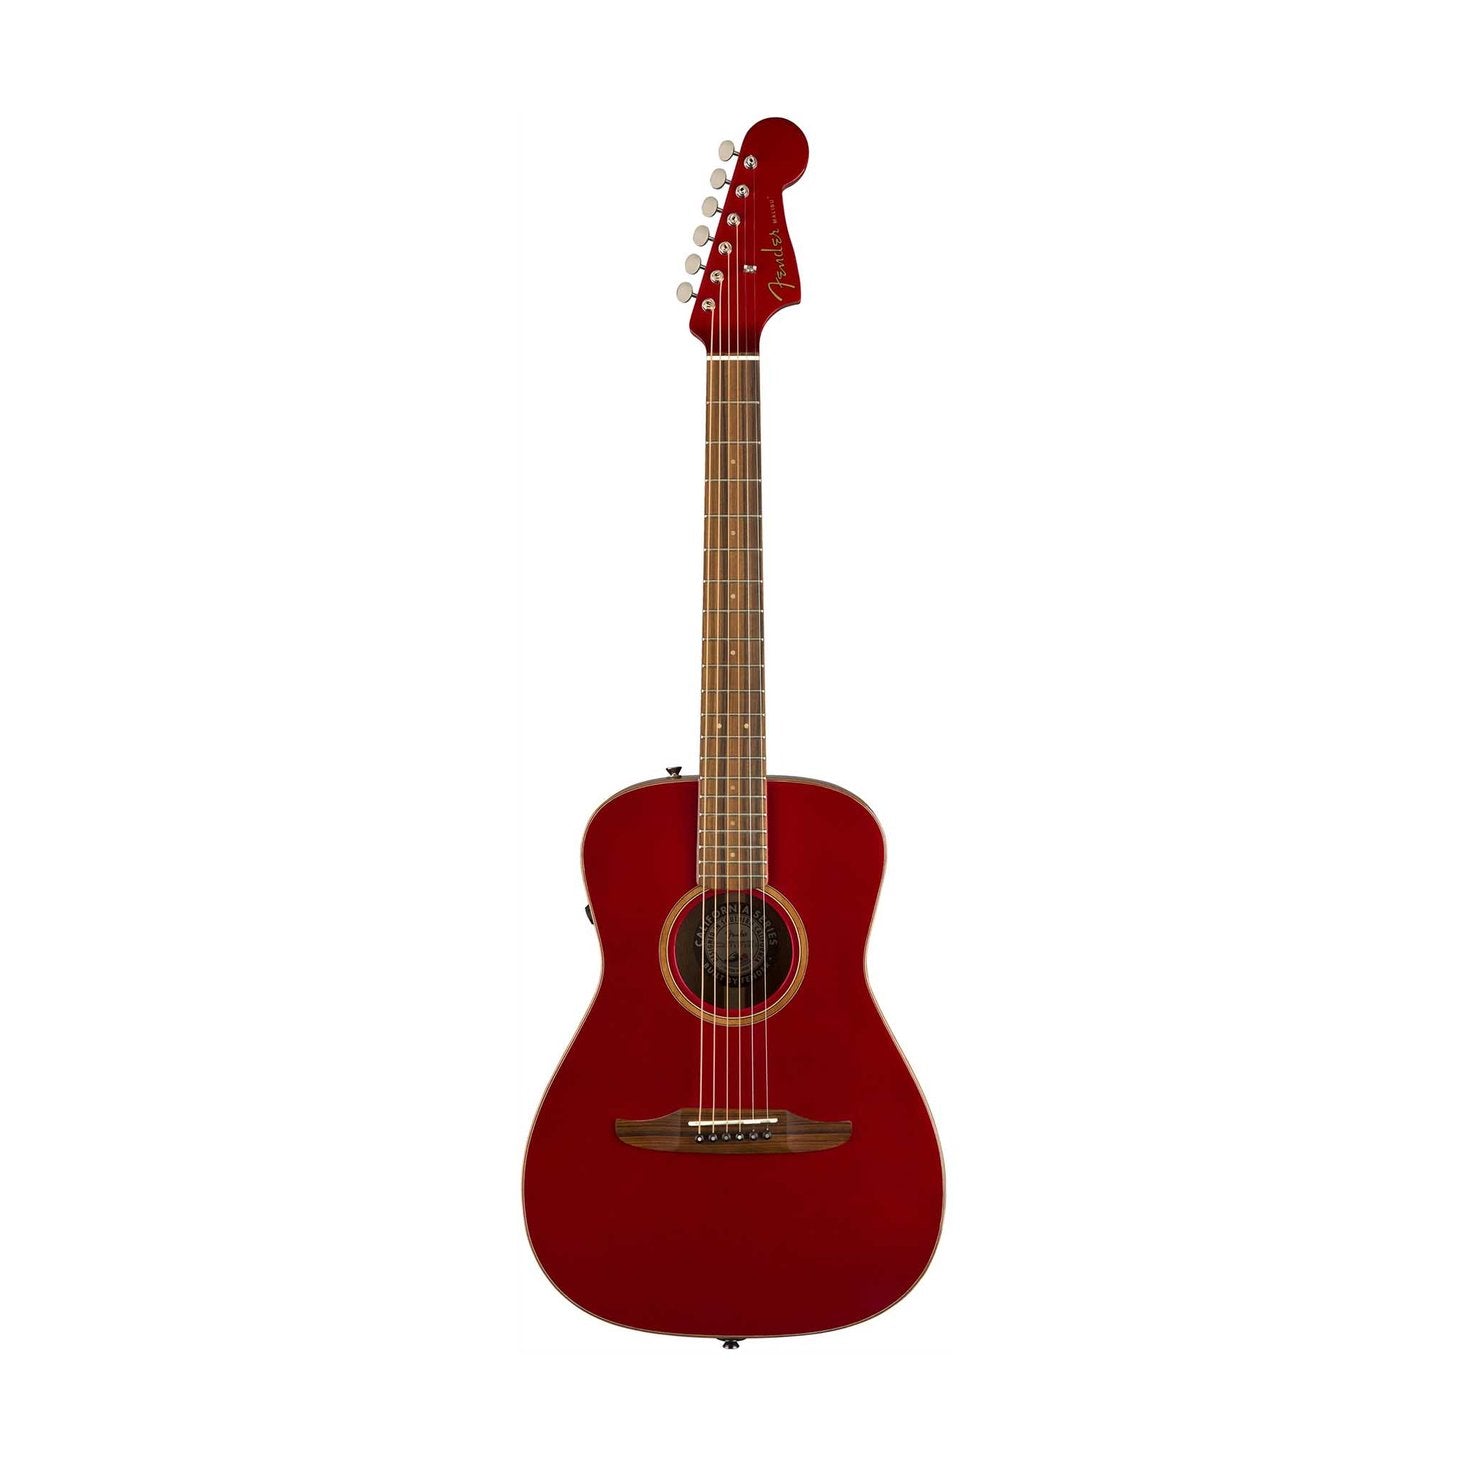 Fender Malibu Classic Small-Bodied Acoustic Guitar w/Bag, Hot Rod Red Metallic, FENDER, ACOUSTIC GUITAR, fender-acoustic-guitar-f03-097-0922-215, ZOSO MUSIC SDN BHD